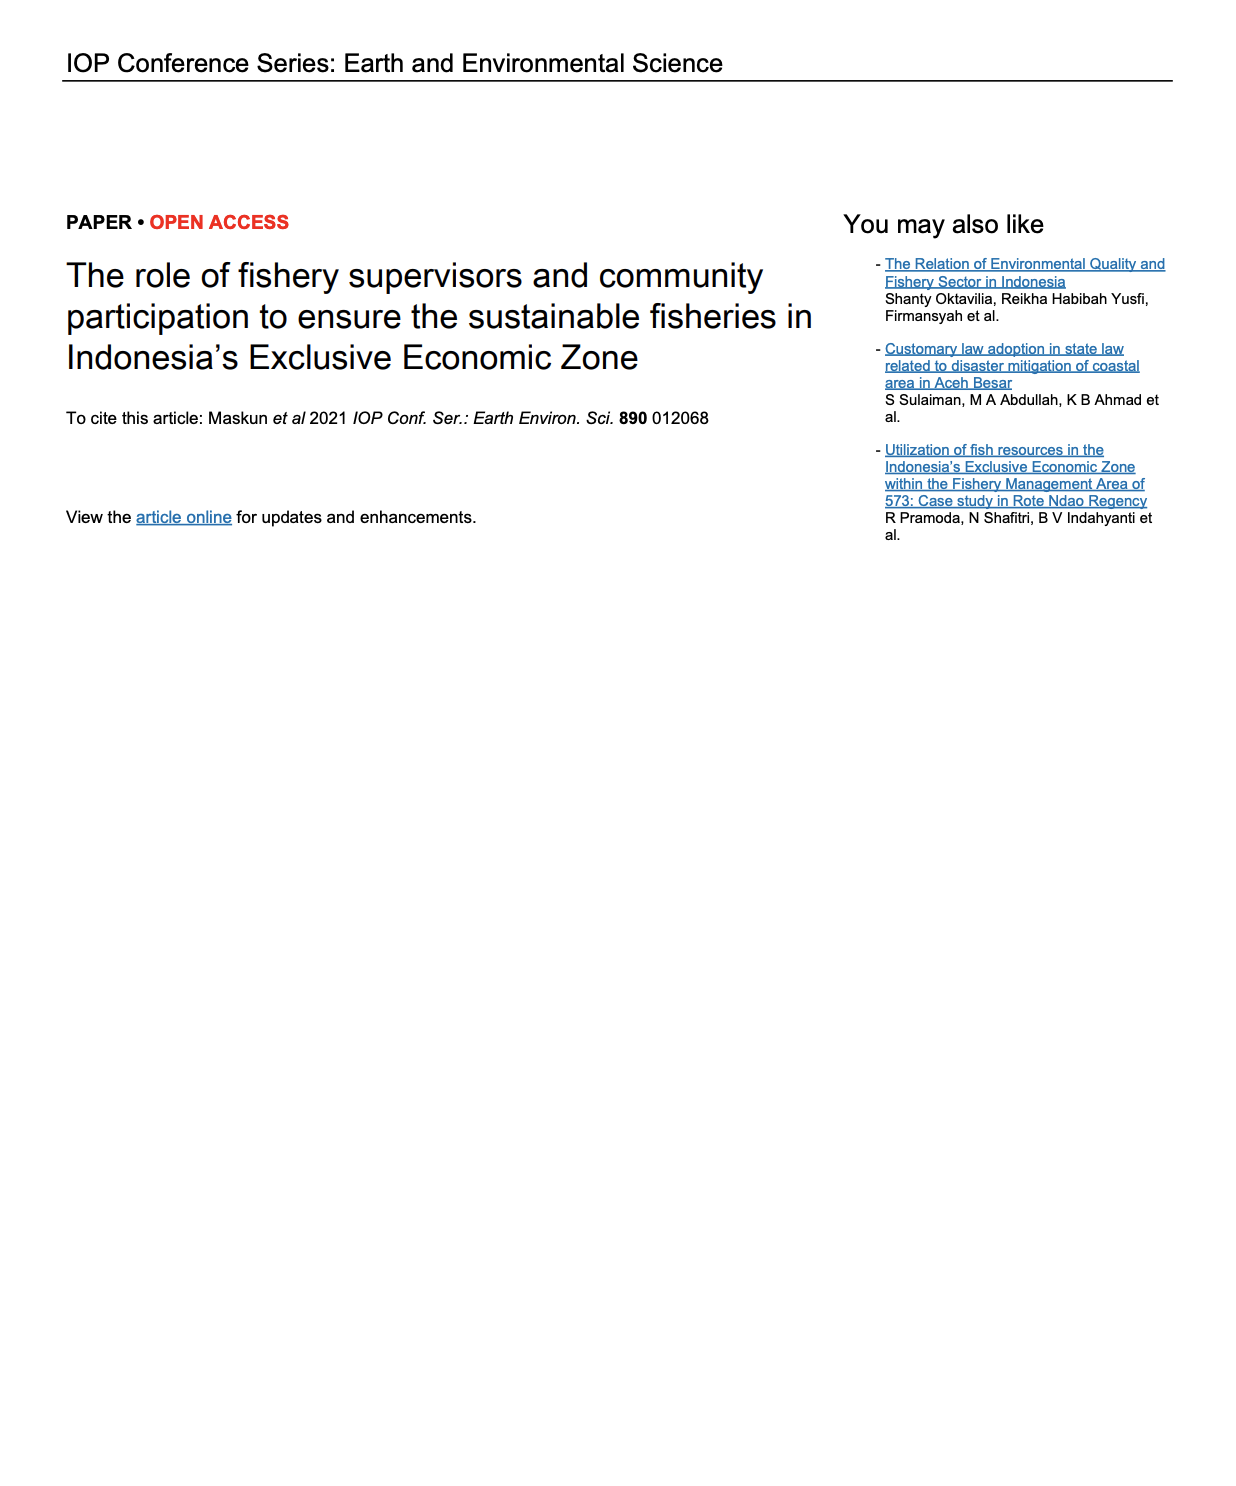 The role of fishery supervisors and community participation to ensure the sustainable fisheries in Indonesia’s EEZ zone